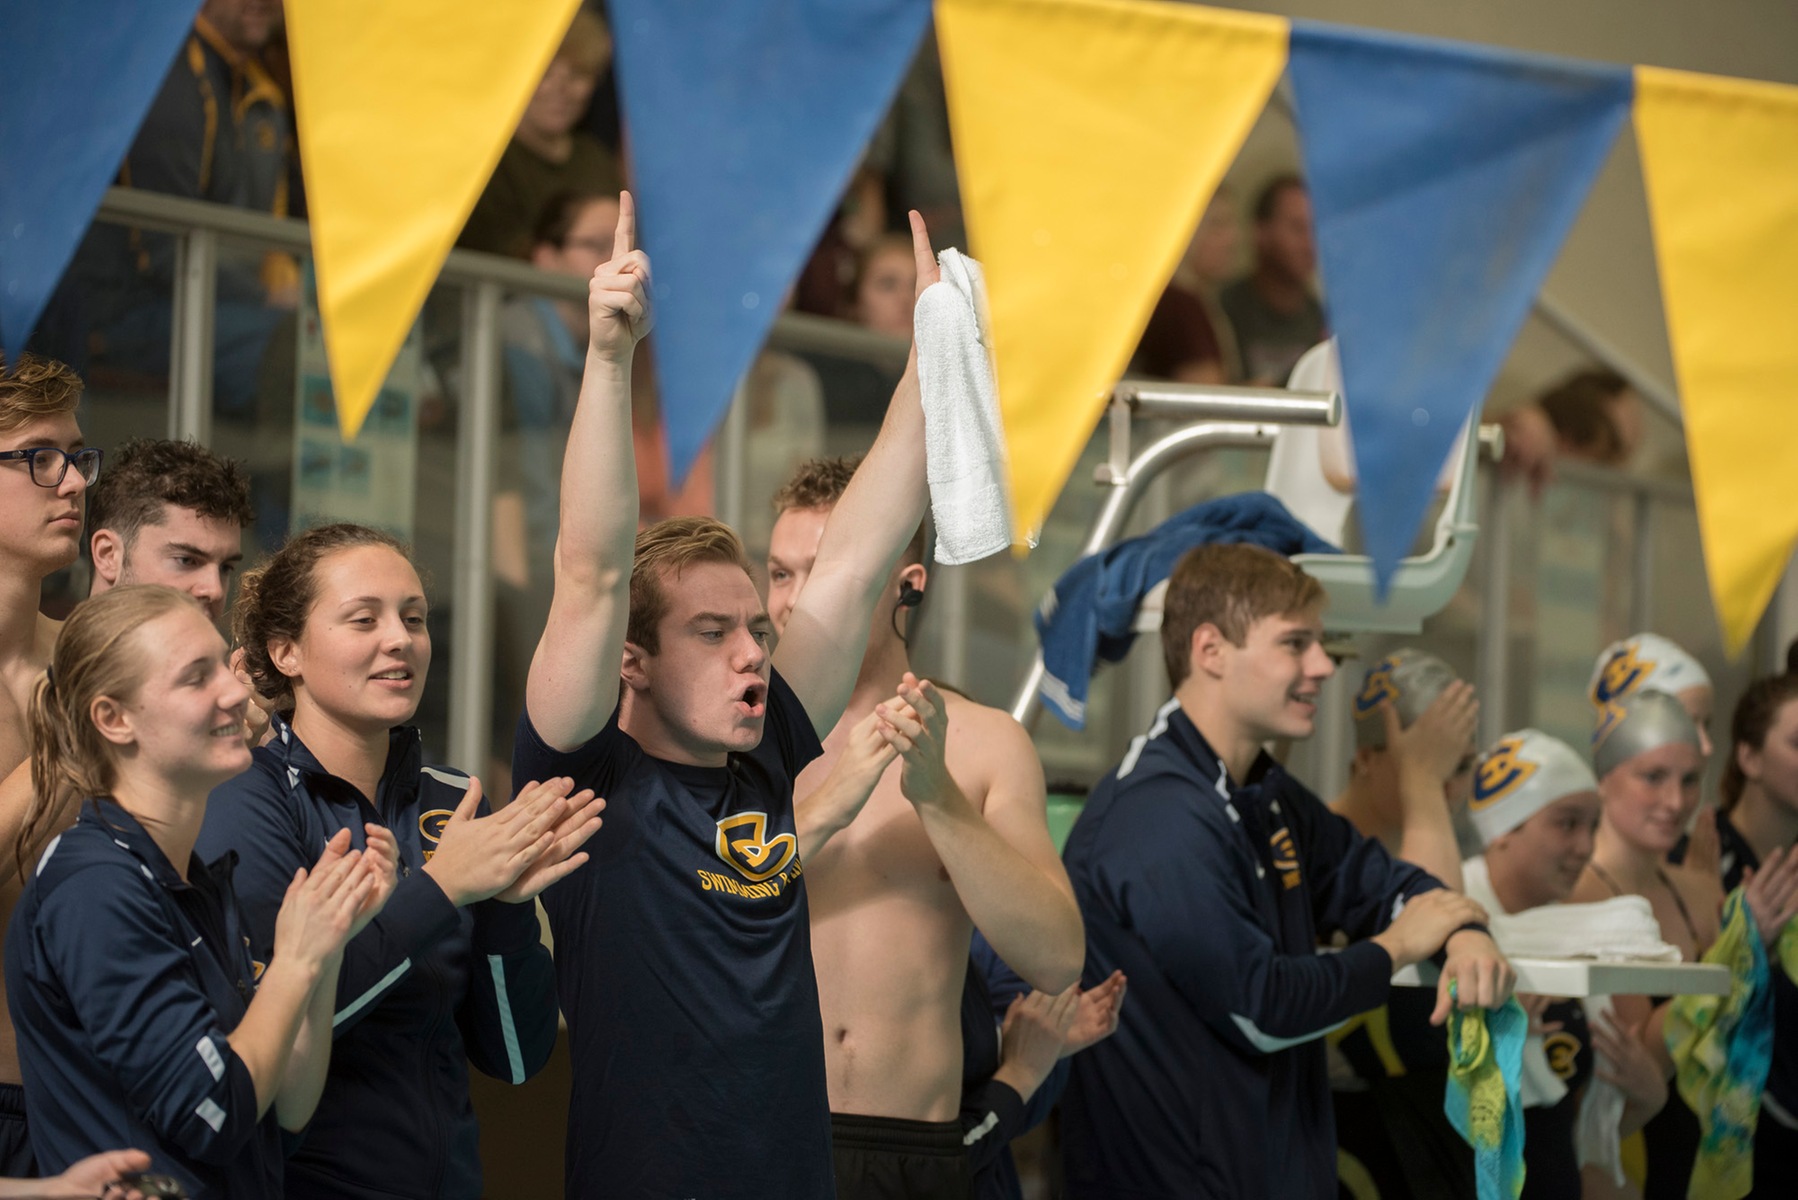 Men's Swim & Dive in 2nd, Women in 3rd after Day 1 of WIAC Championships